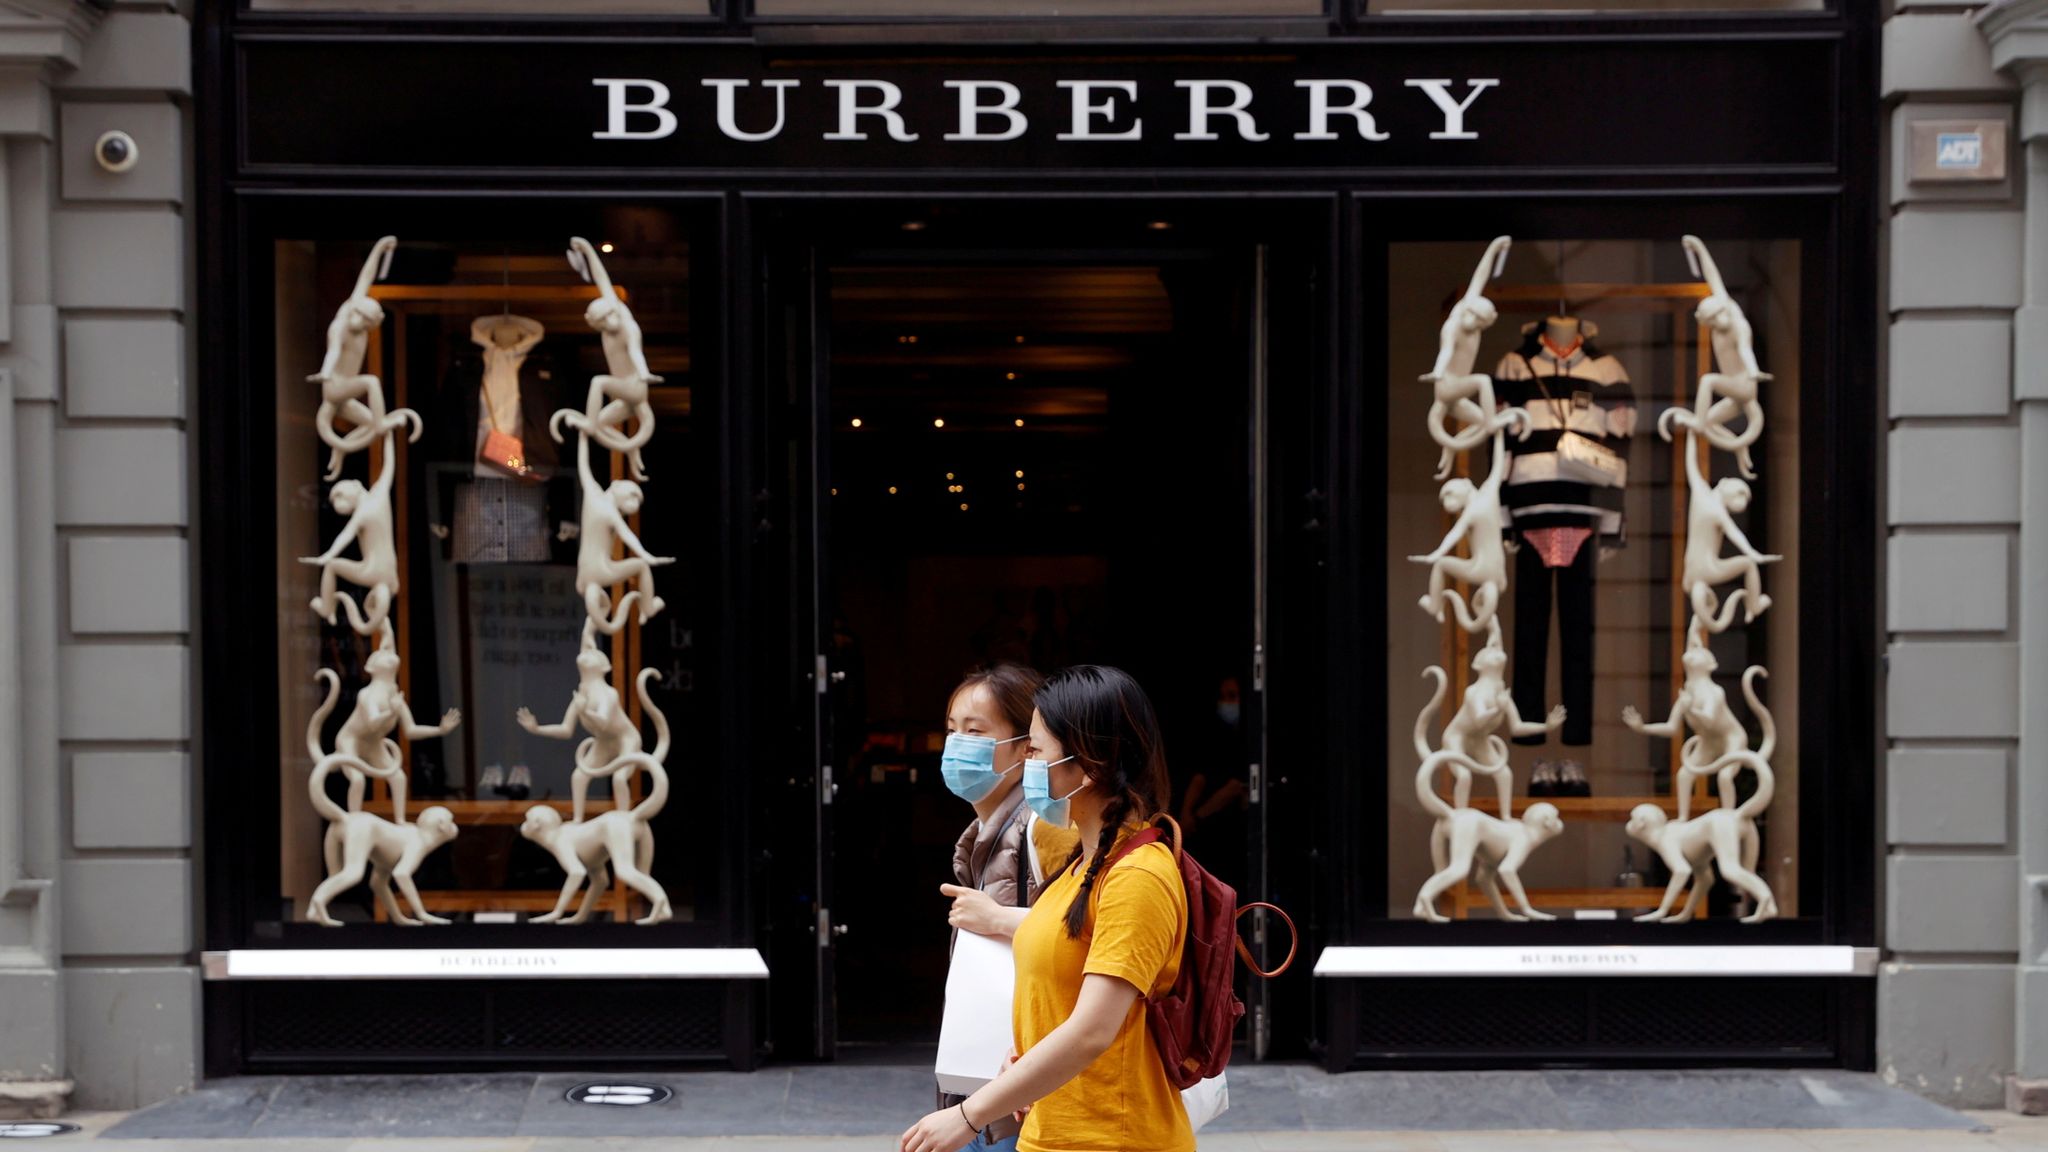 Burberry shares fall as lack of tourists dents luxury brand's sales |  Business News | Sky News